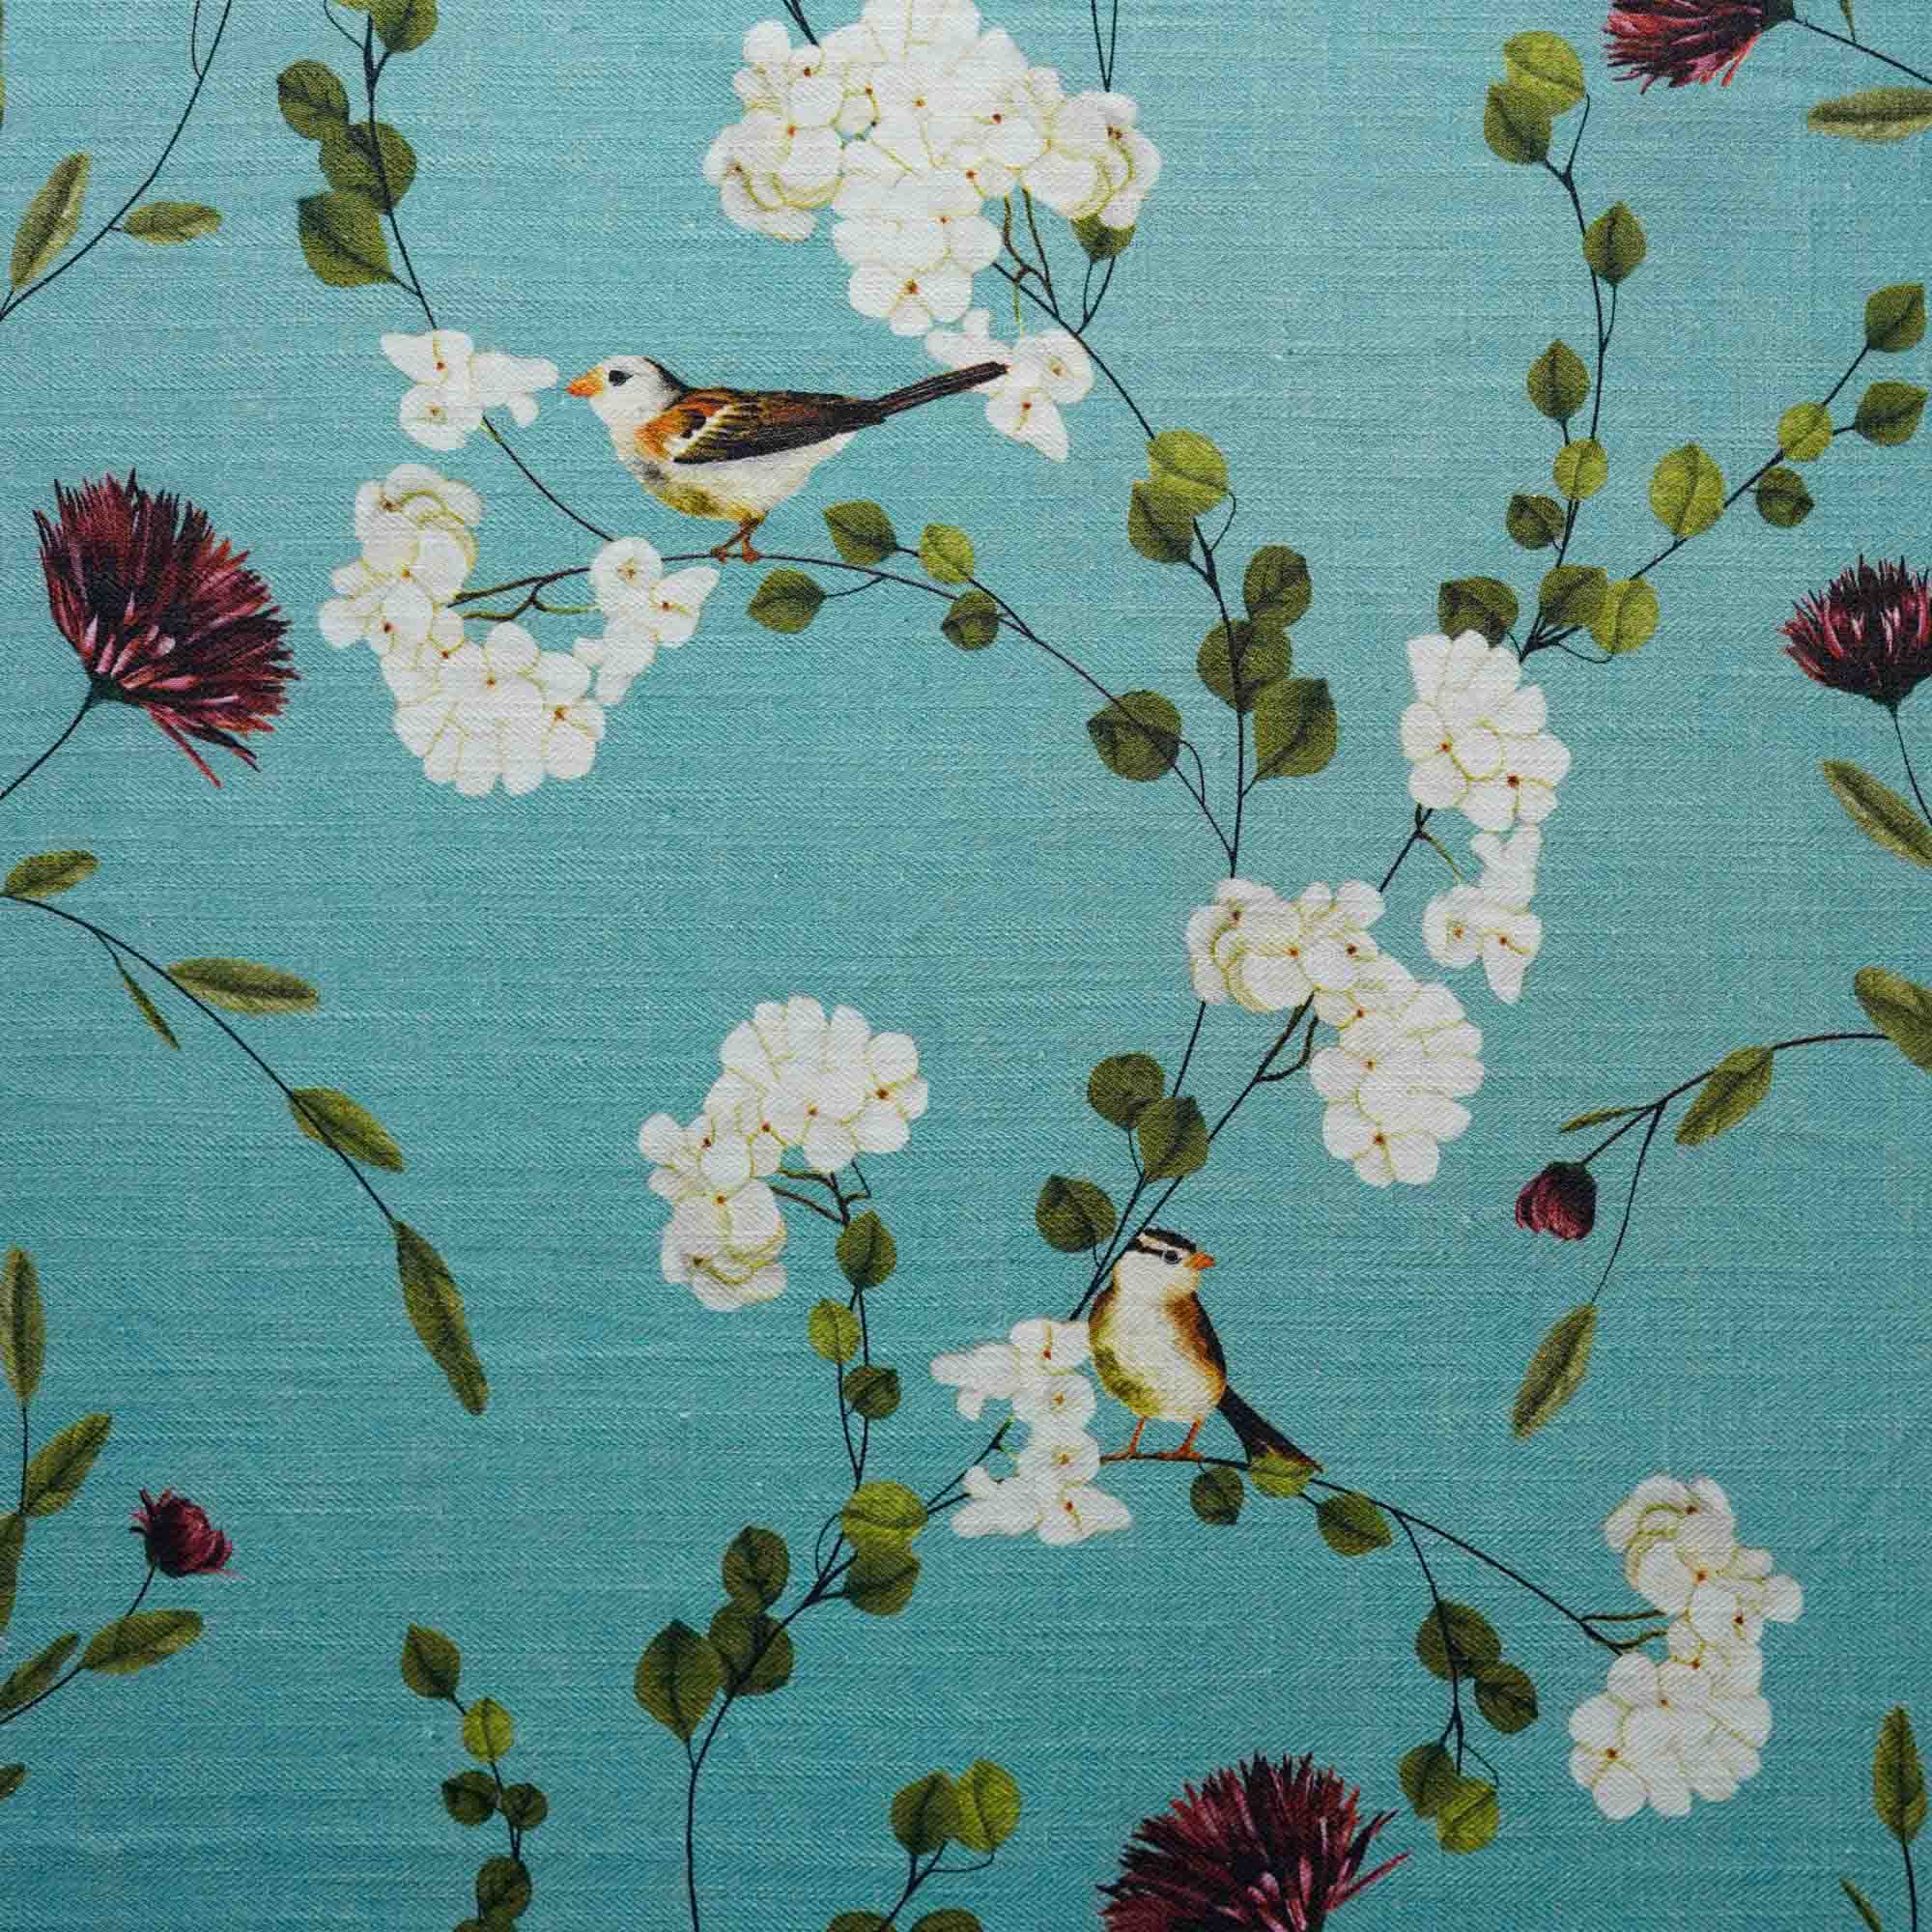 Chrysanthemums and Sparrows Ocean Cotton Linen Blend Fabric (Horizontal Repeat)